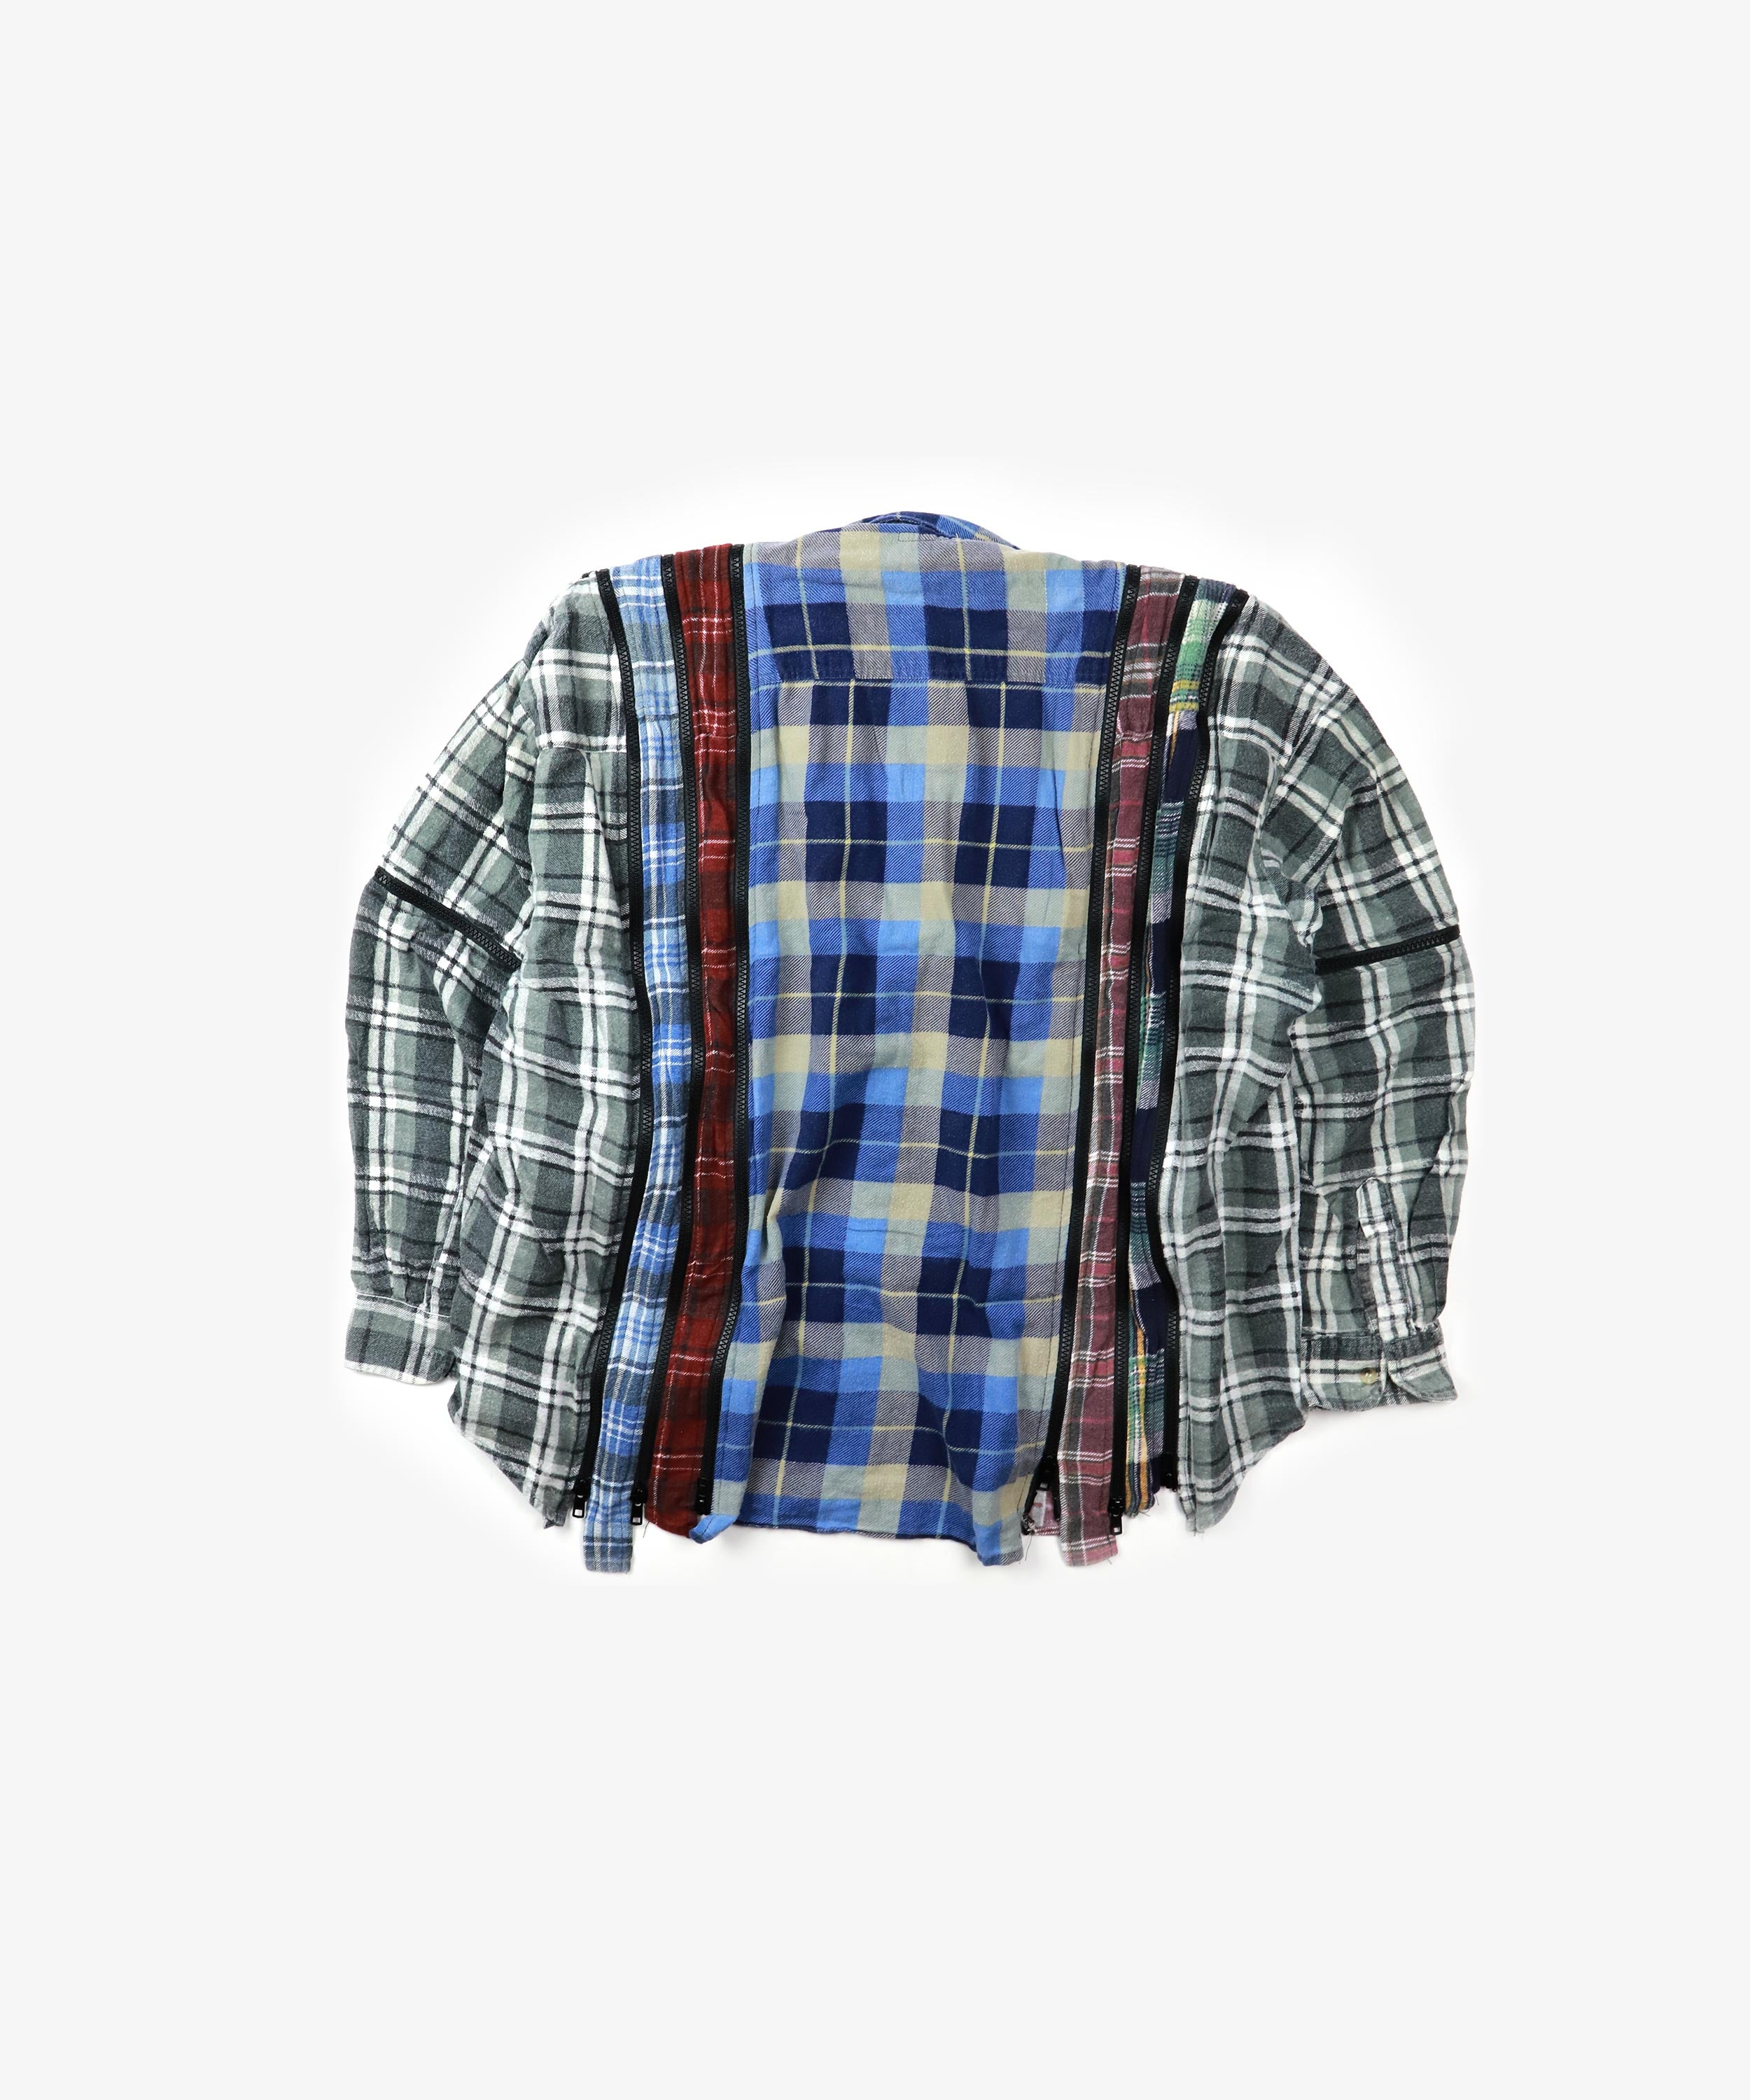 Rebuild by Needles Flannel Shirt -7 Cuts Wide / Zipped | Nepenthes ...